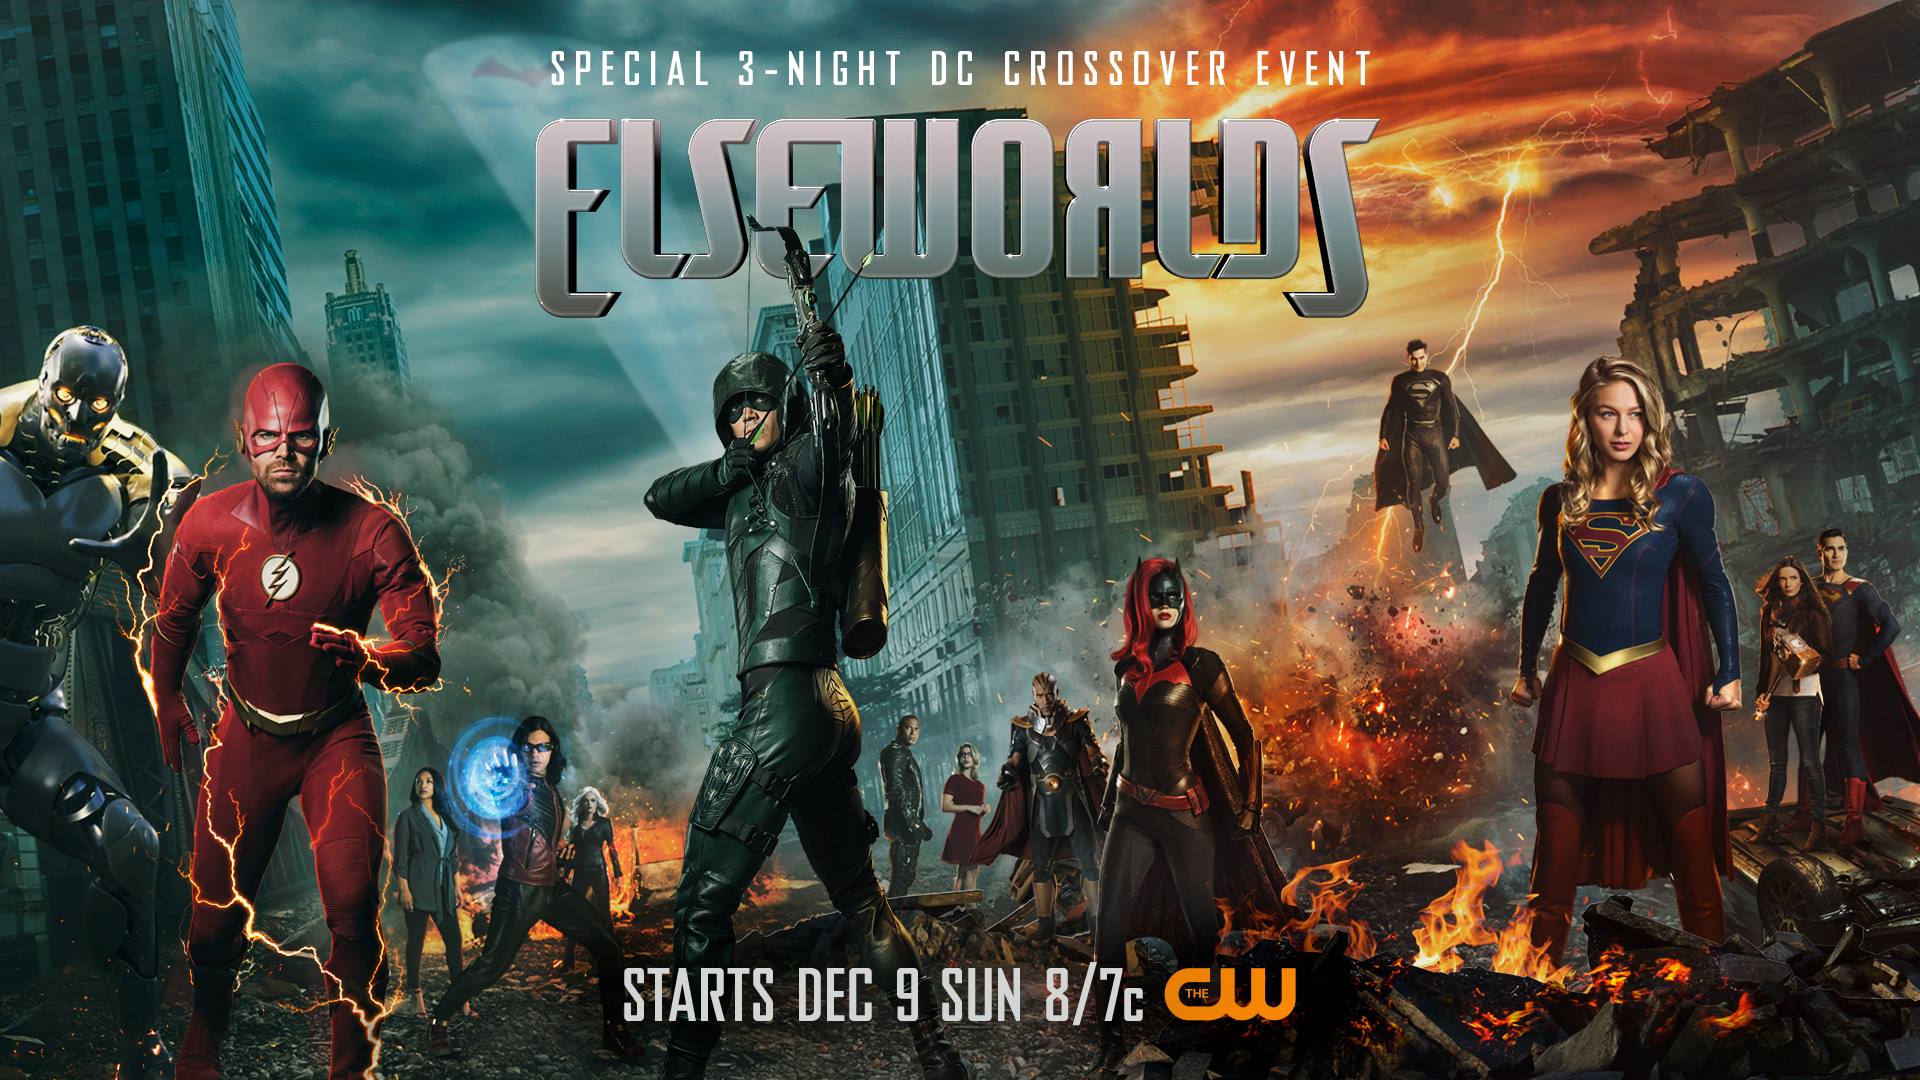 New Elseworlds Poster Teases a Mystery Character